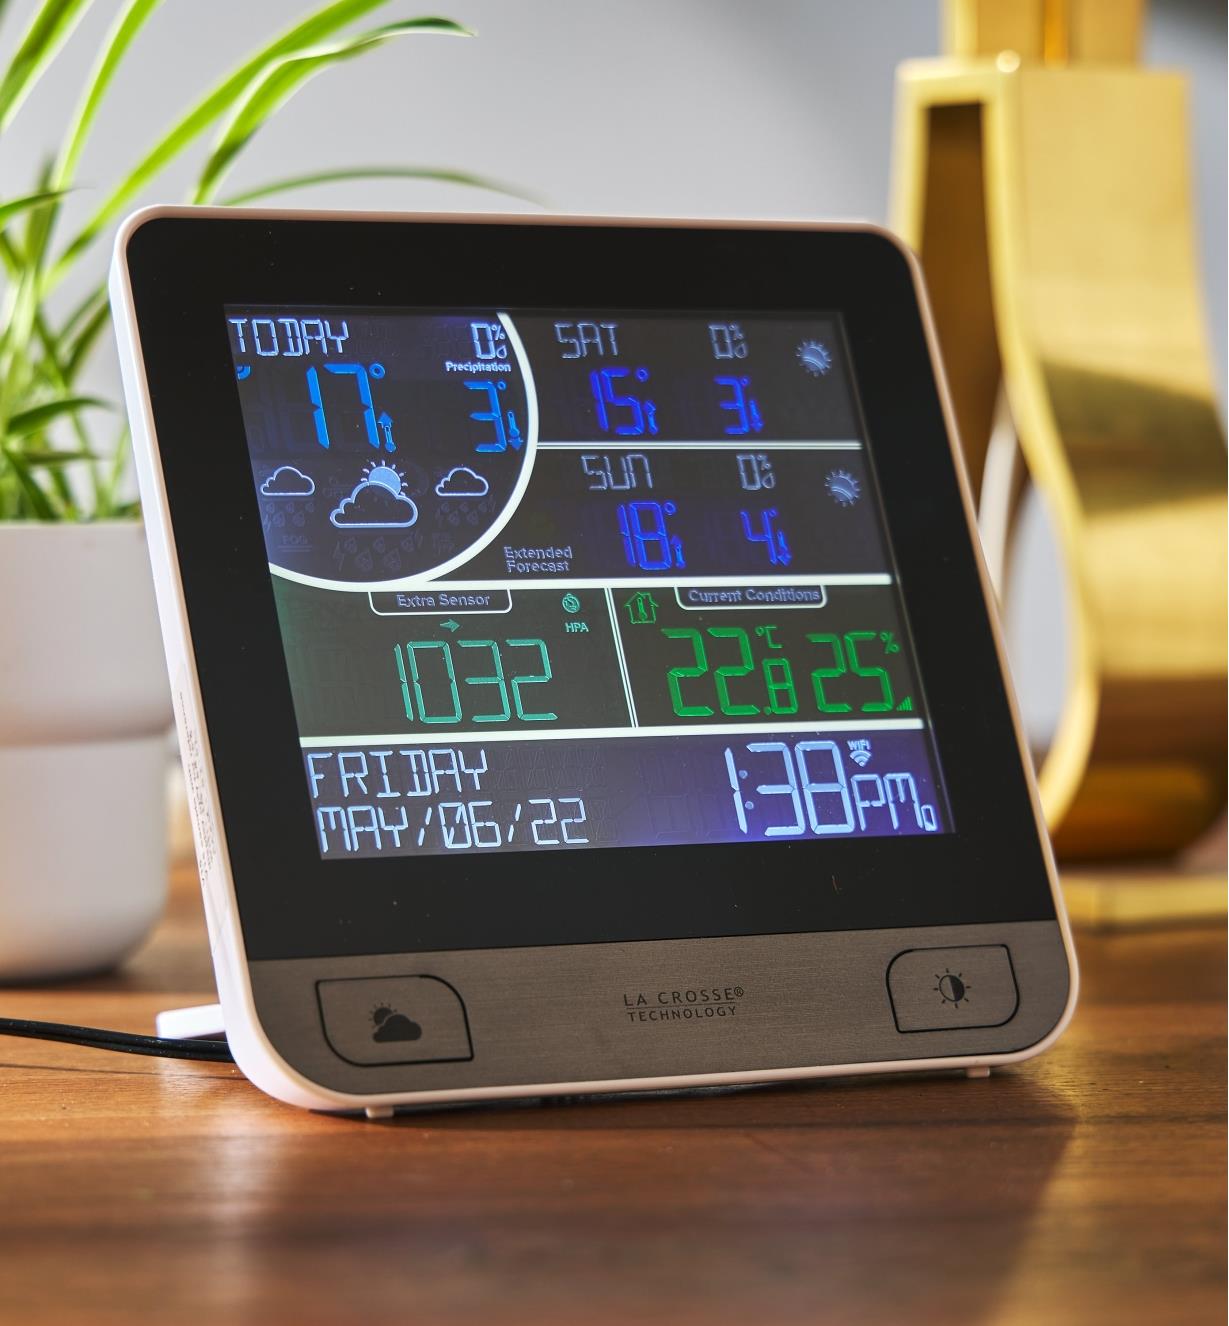 Wi-Fi forecasting weather station displaying readings in Celsius